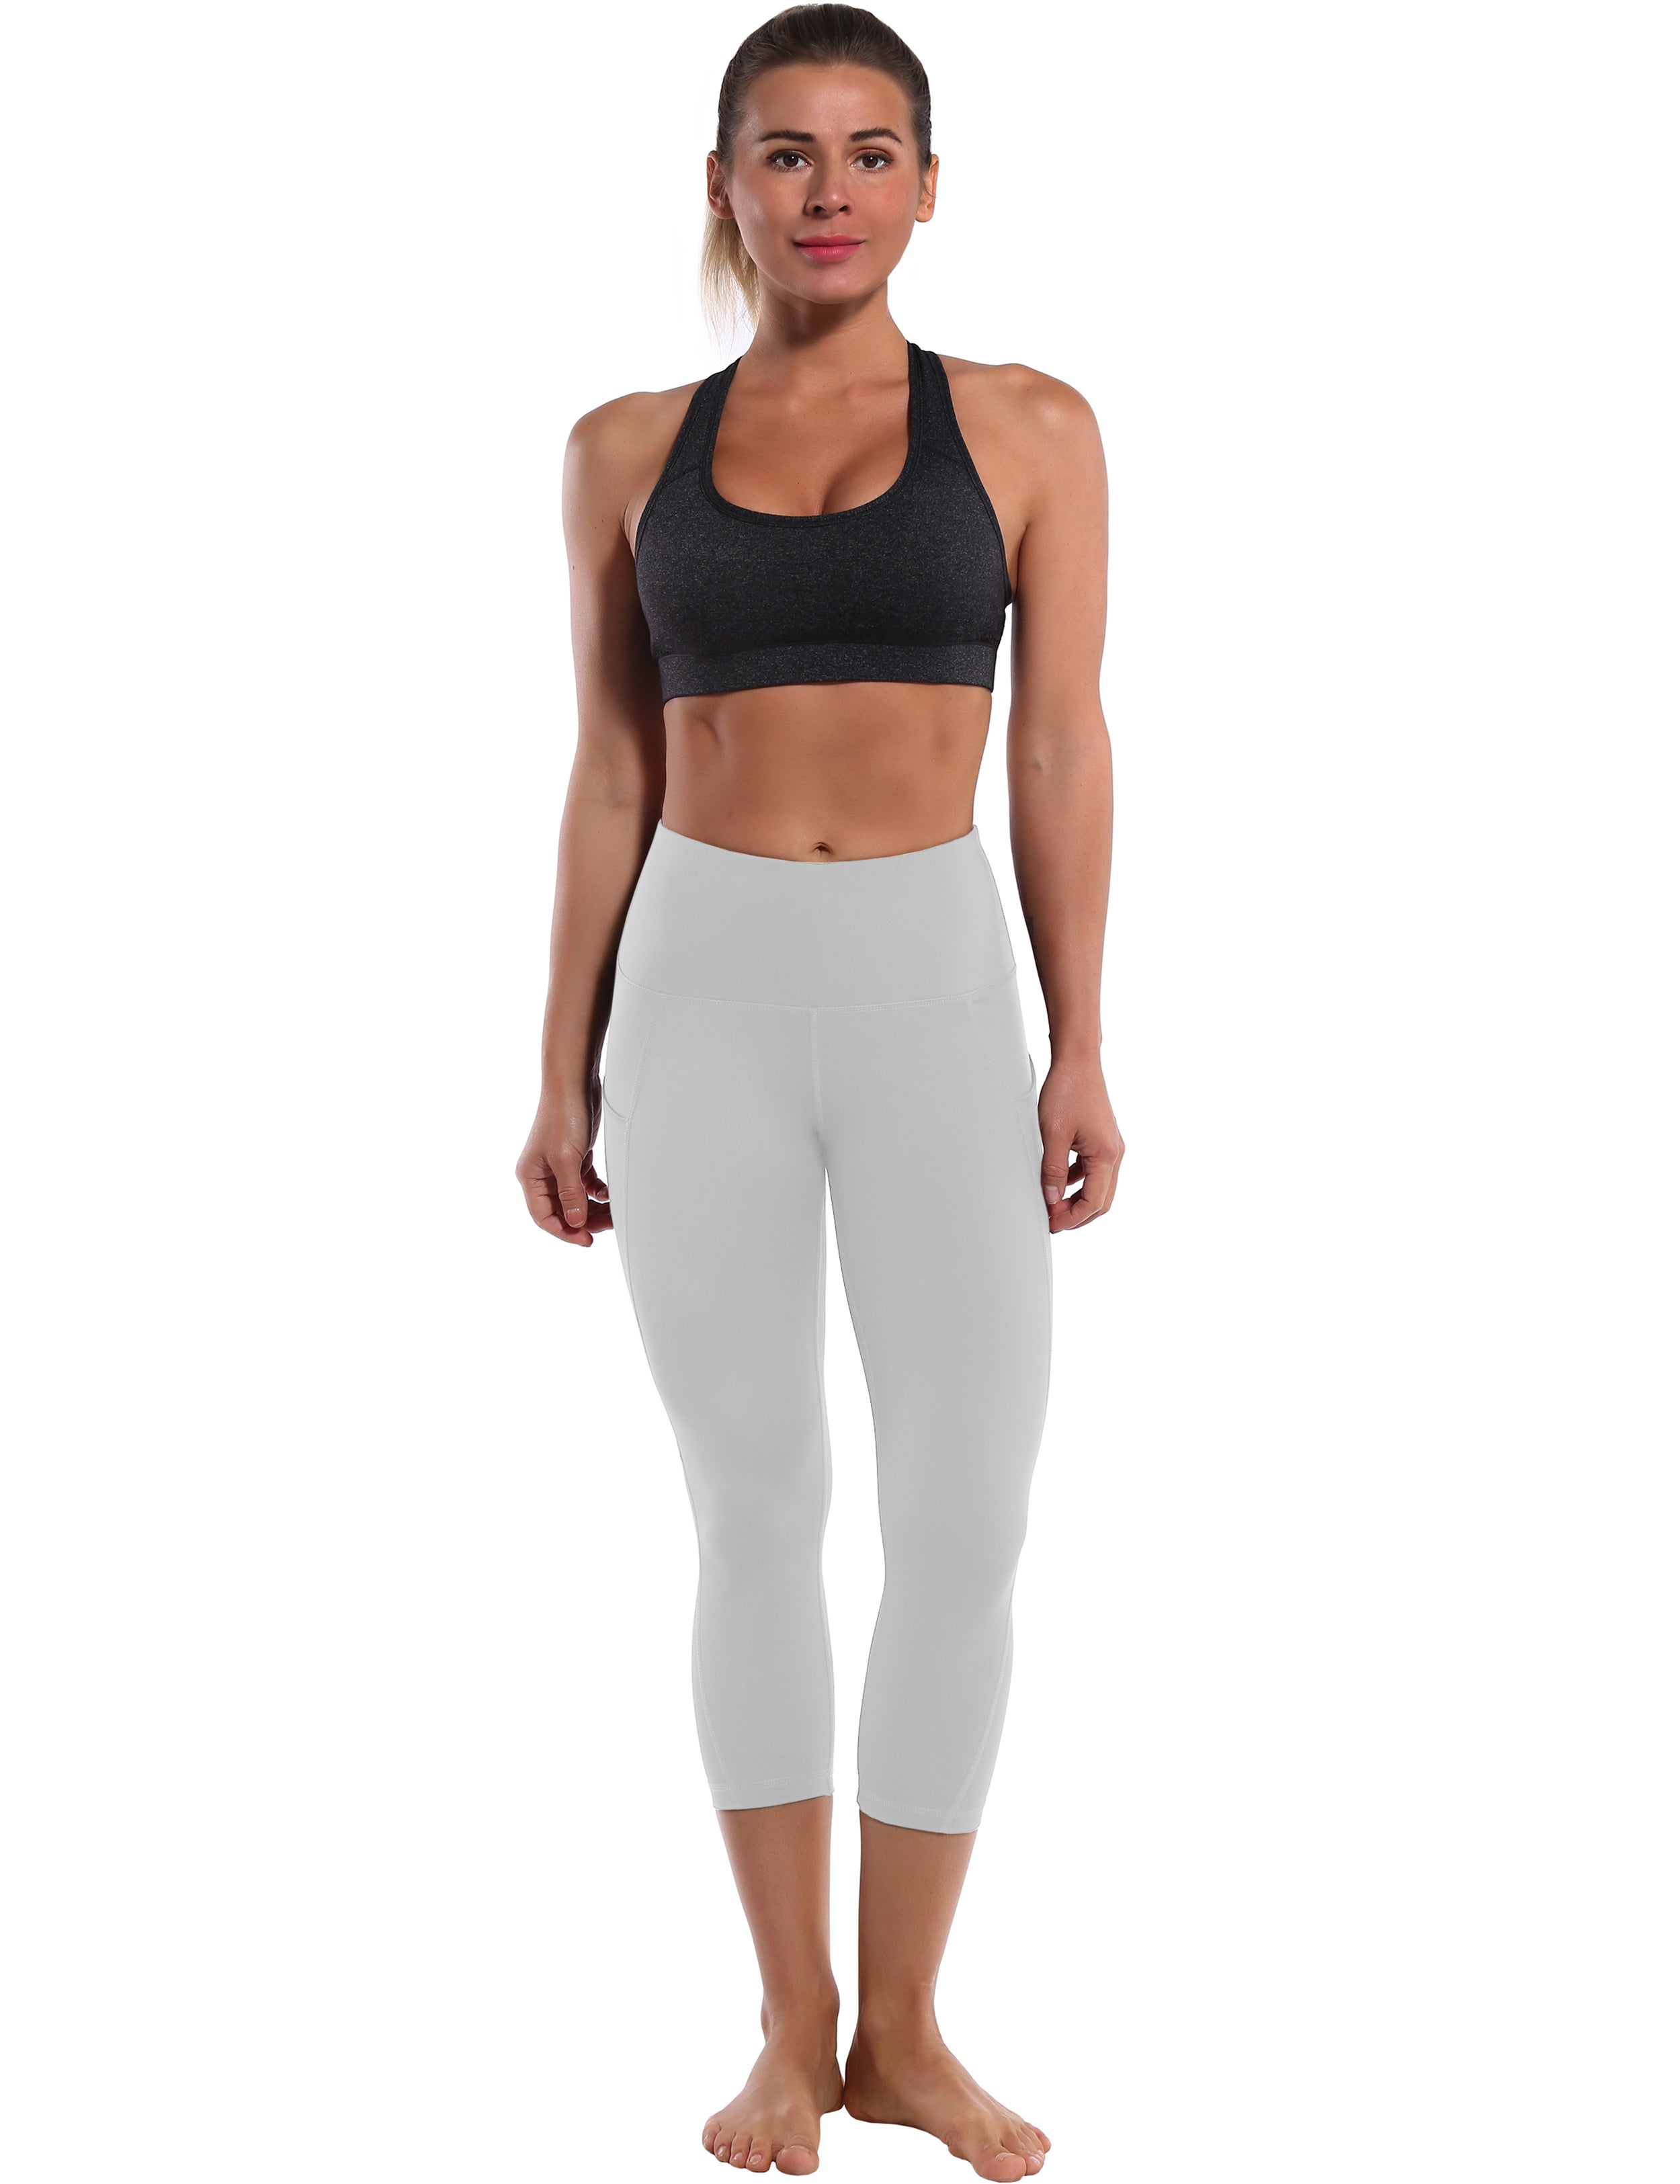 19" High Waist Side Pockets Capris lightgray 75%Nylon/25%Spandex Fabric doesn't attract lint easily 4-way stretch No see-through Moisture-wicking Tummy control Inner pocket